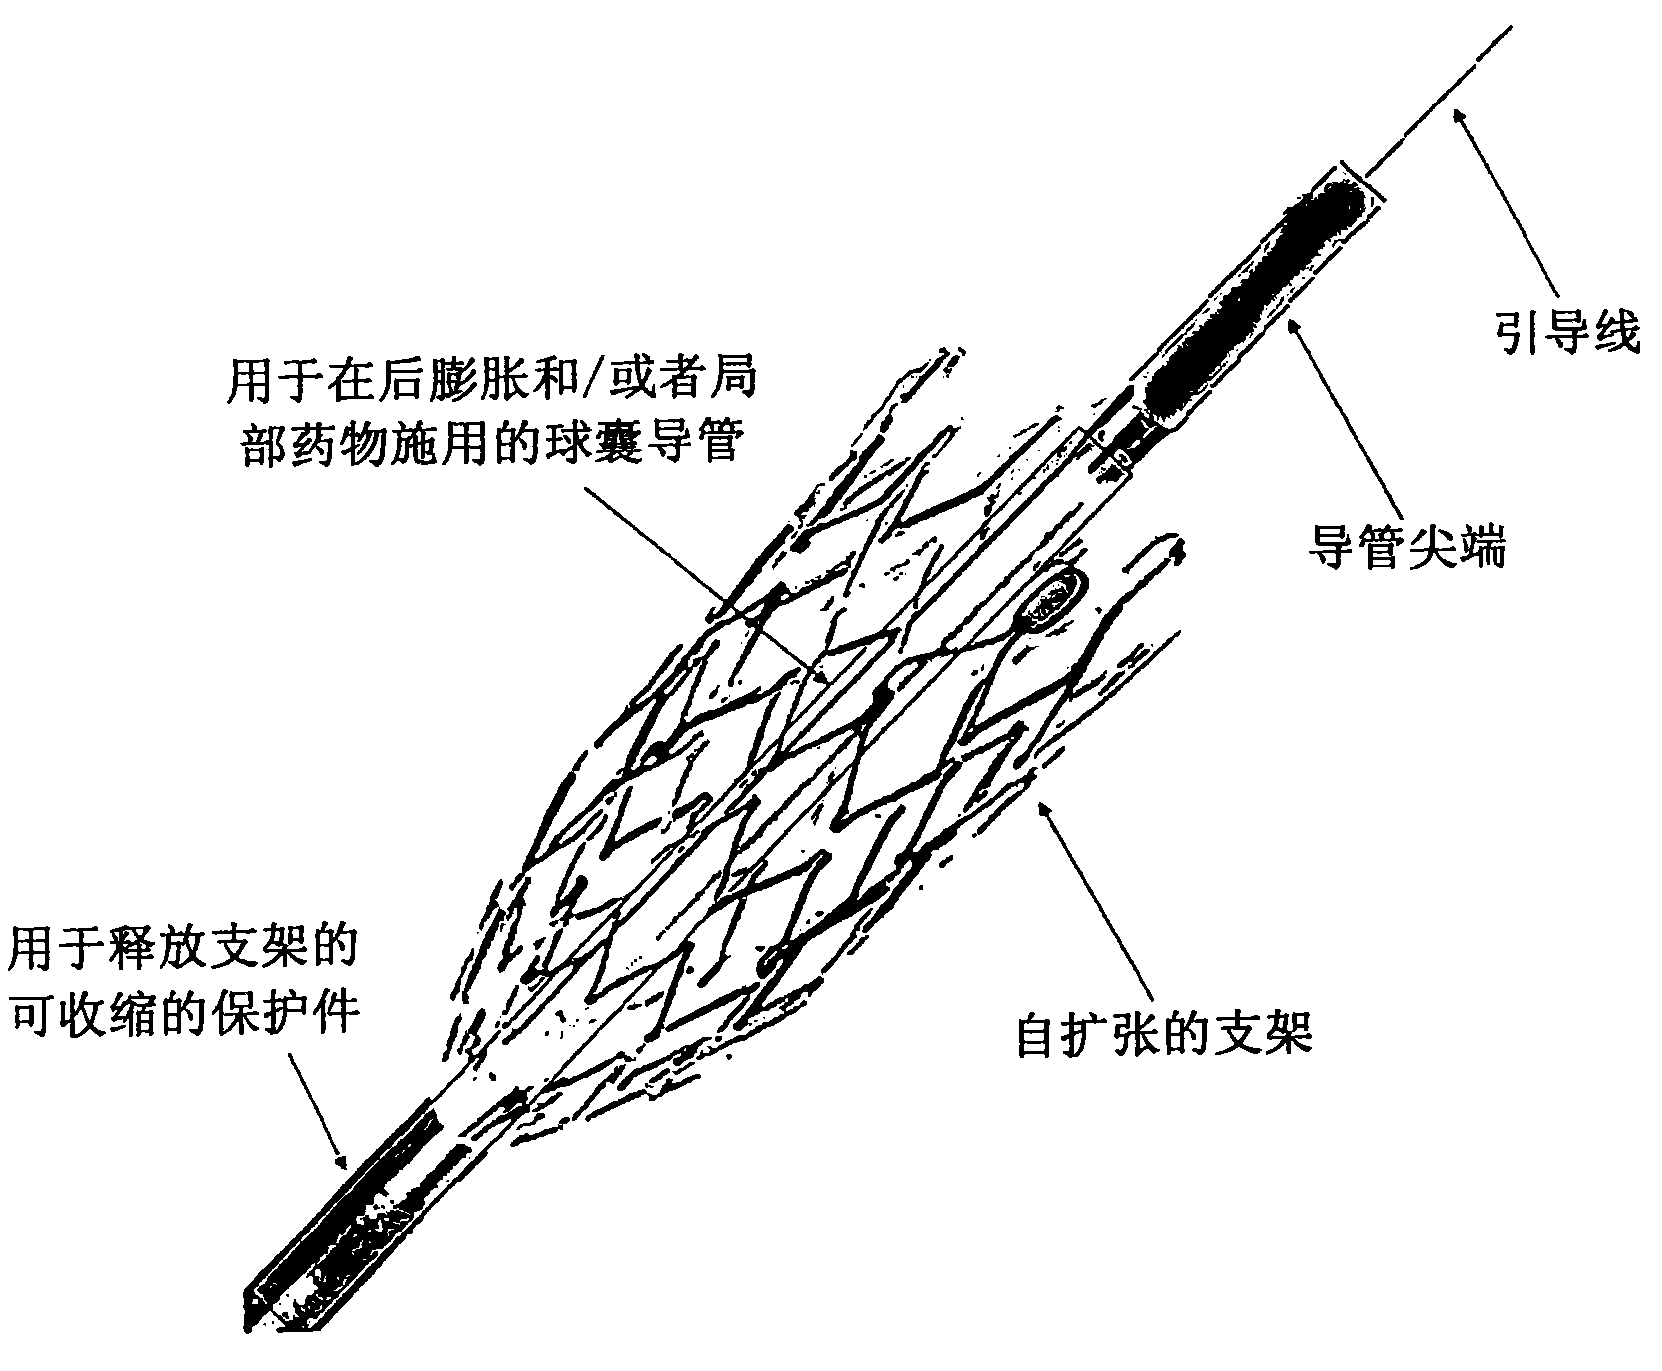 Controlled expansion balloon catheter